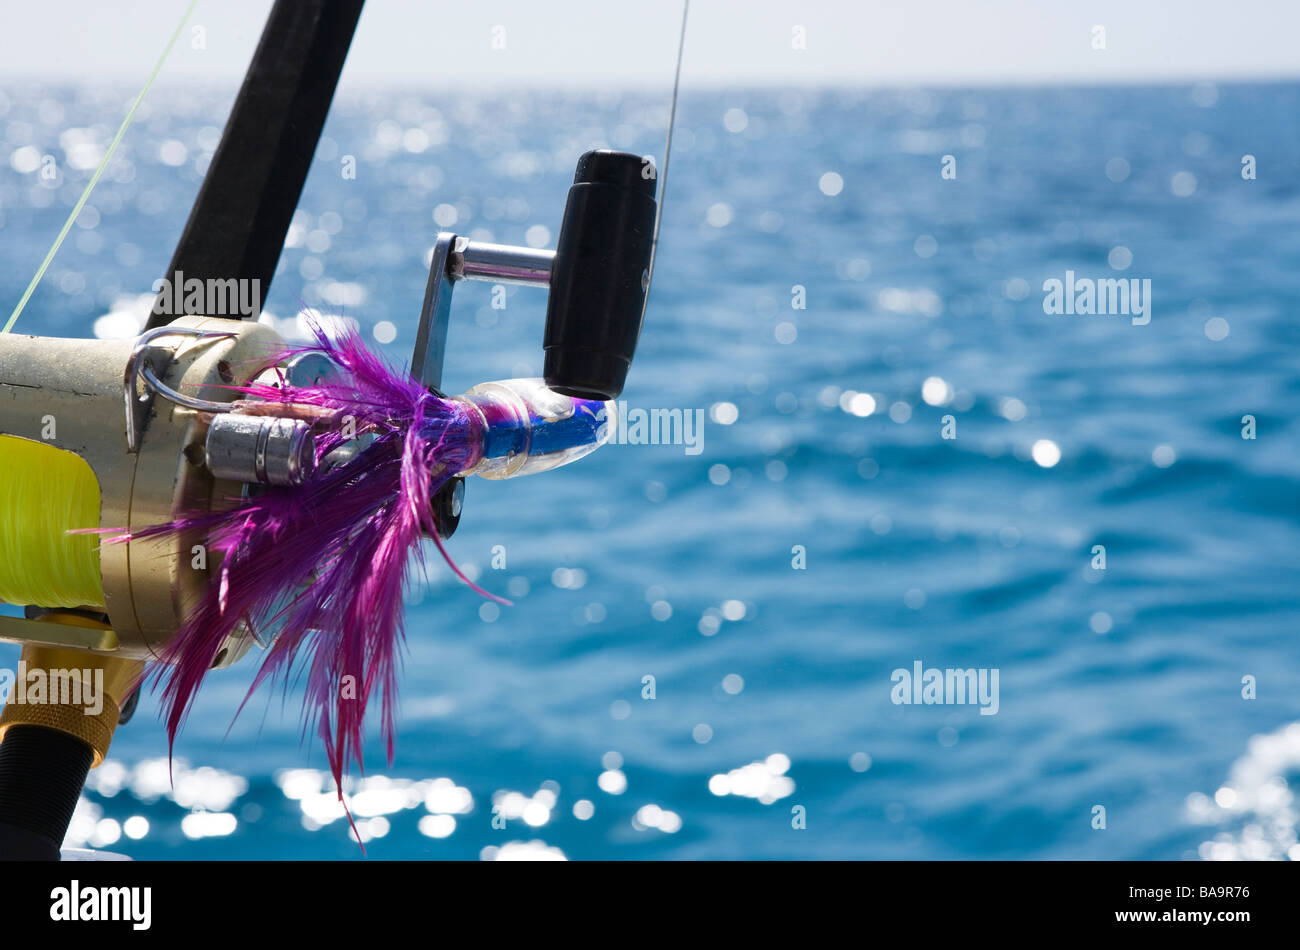 Casting rod on a boat. Stock Photo